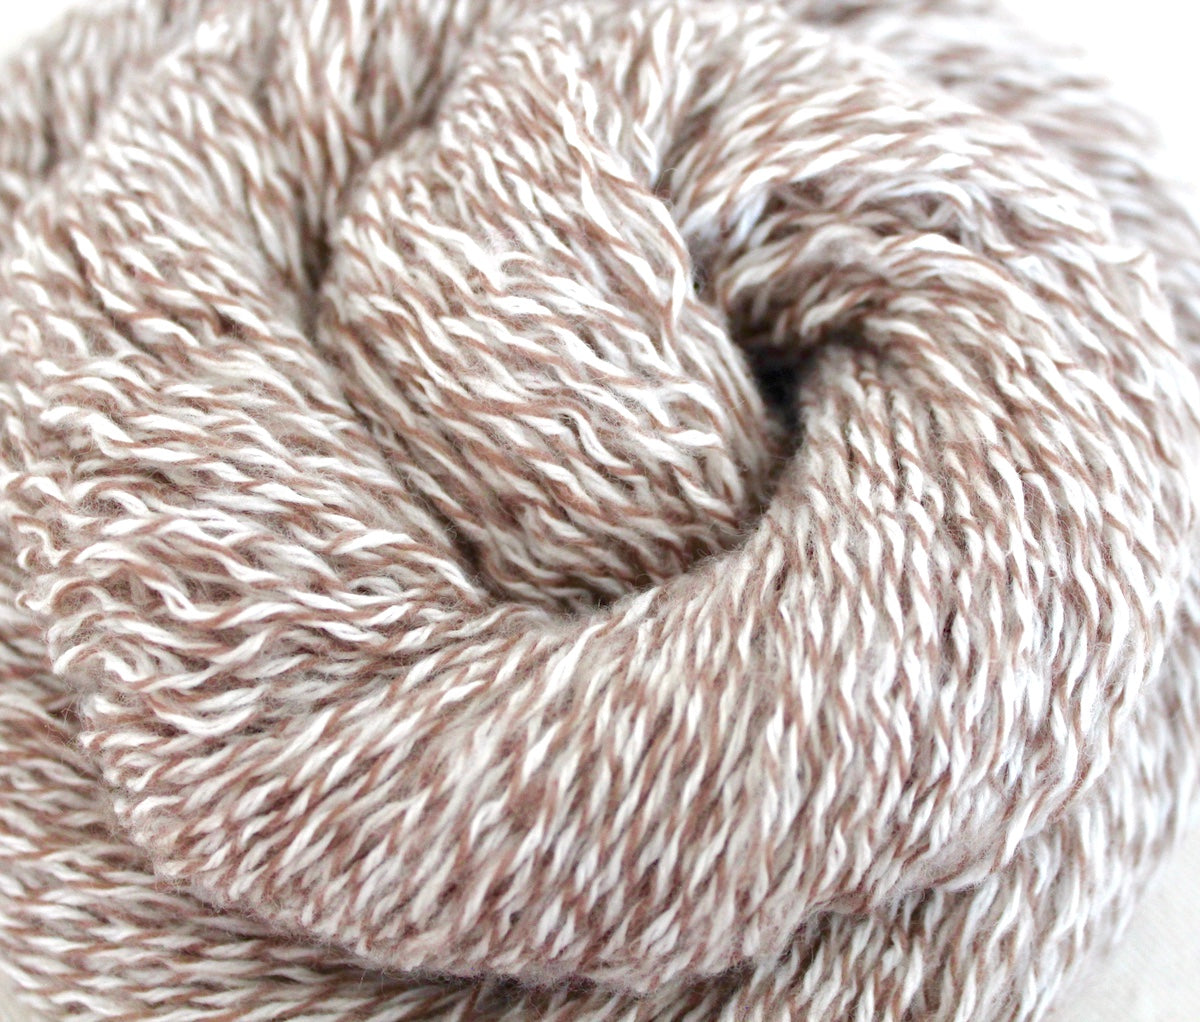 A close up shot of a skein of Vegan, Variegated Tan and White, 100% Acrylic, Sport weight Yarn recycled by hand from unwanted sweaters beautifully coiled in the center of the frame. 